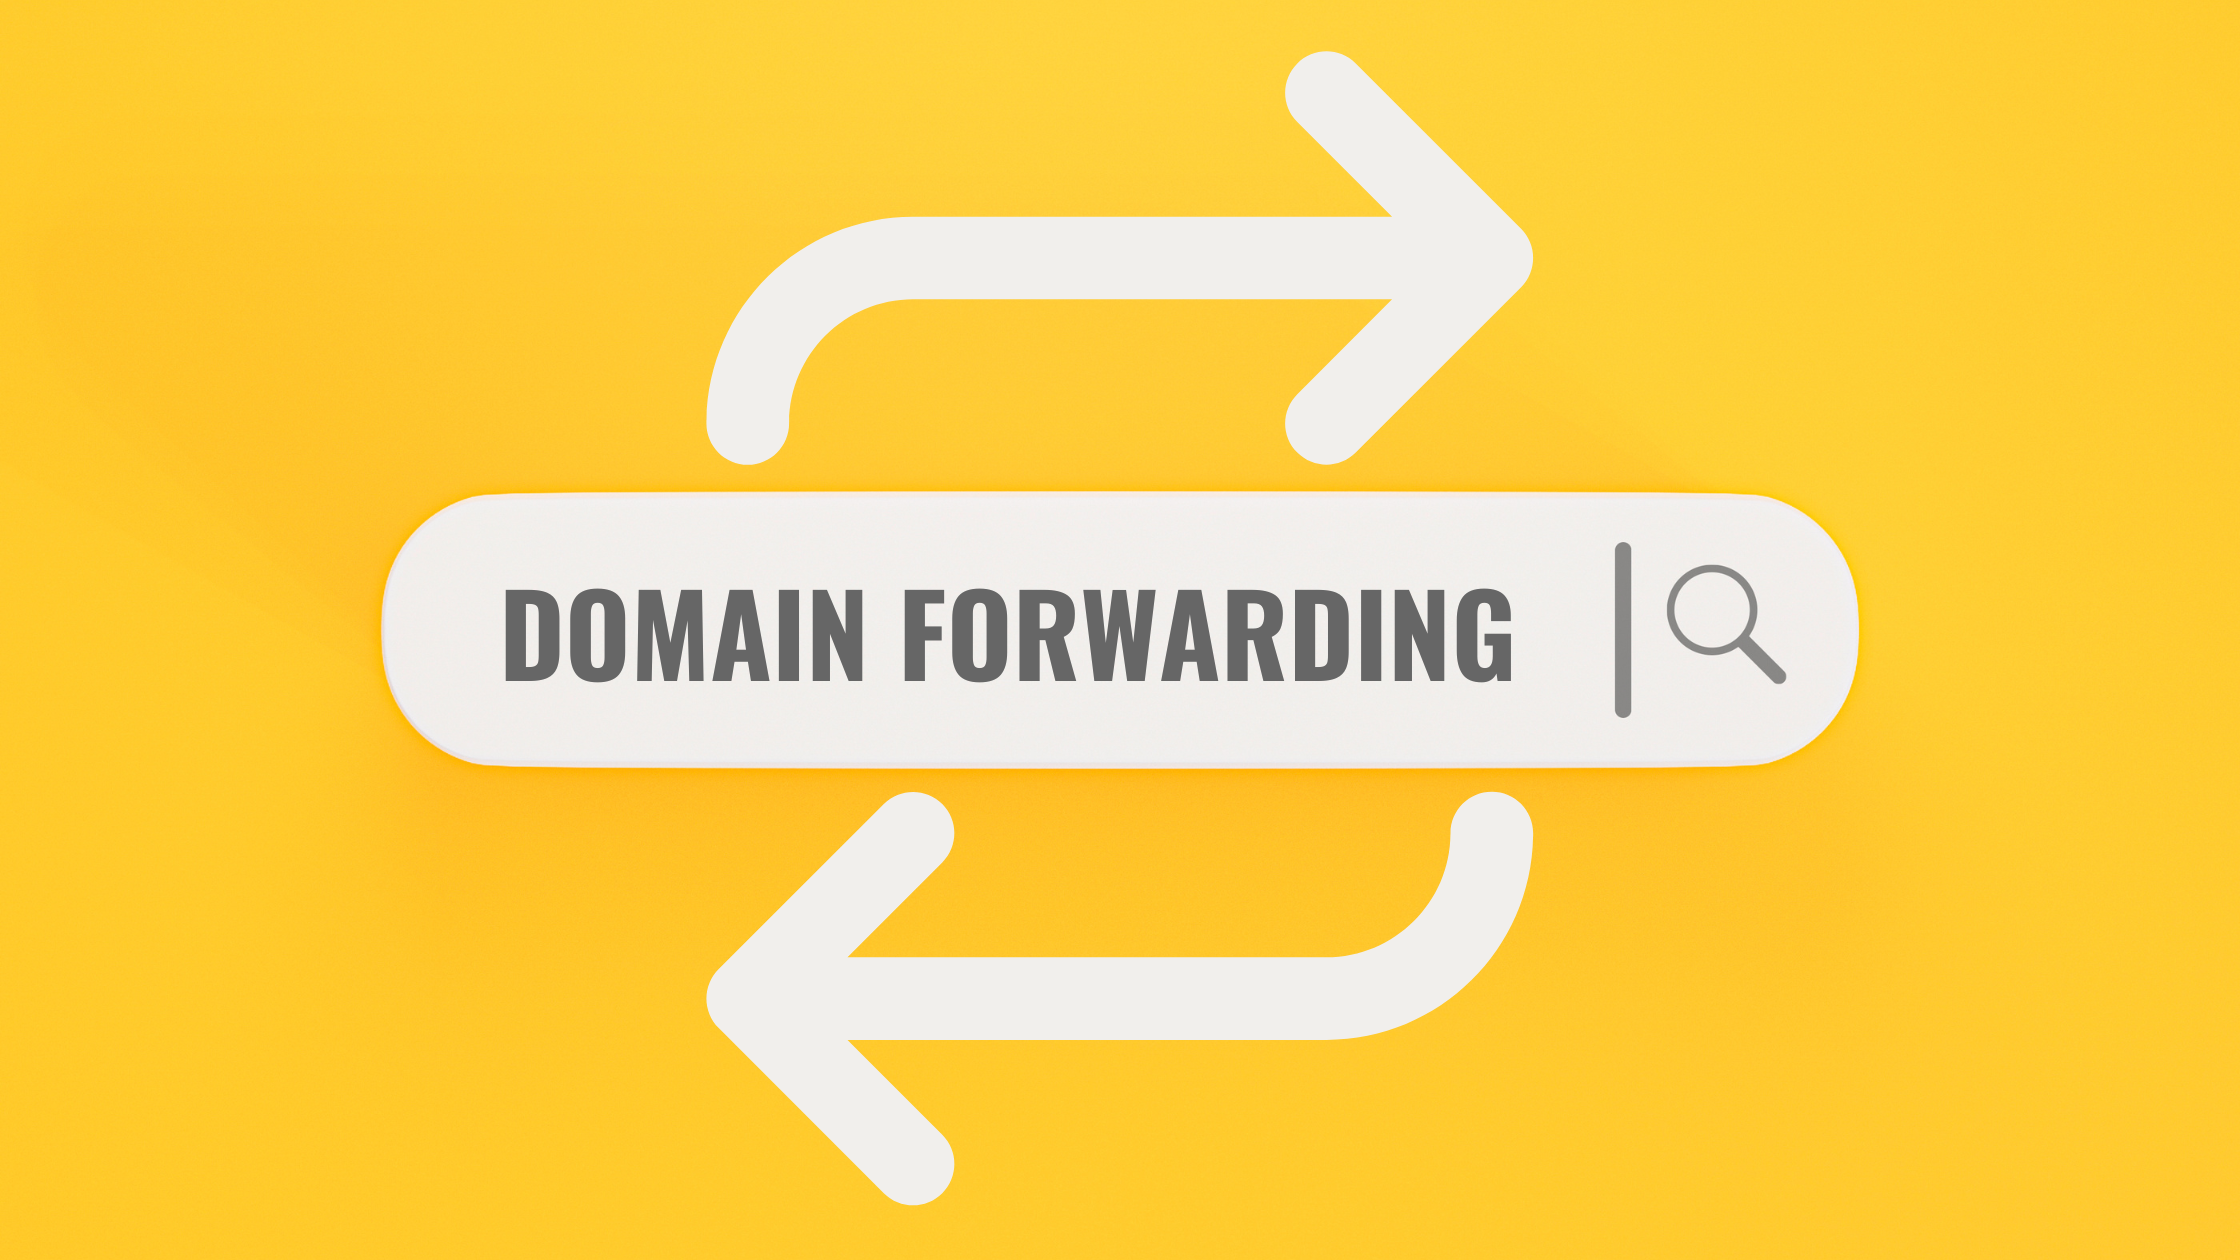 What You Need to Know About Domain Forwarding